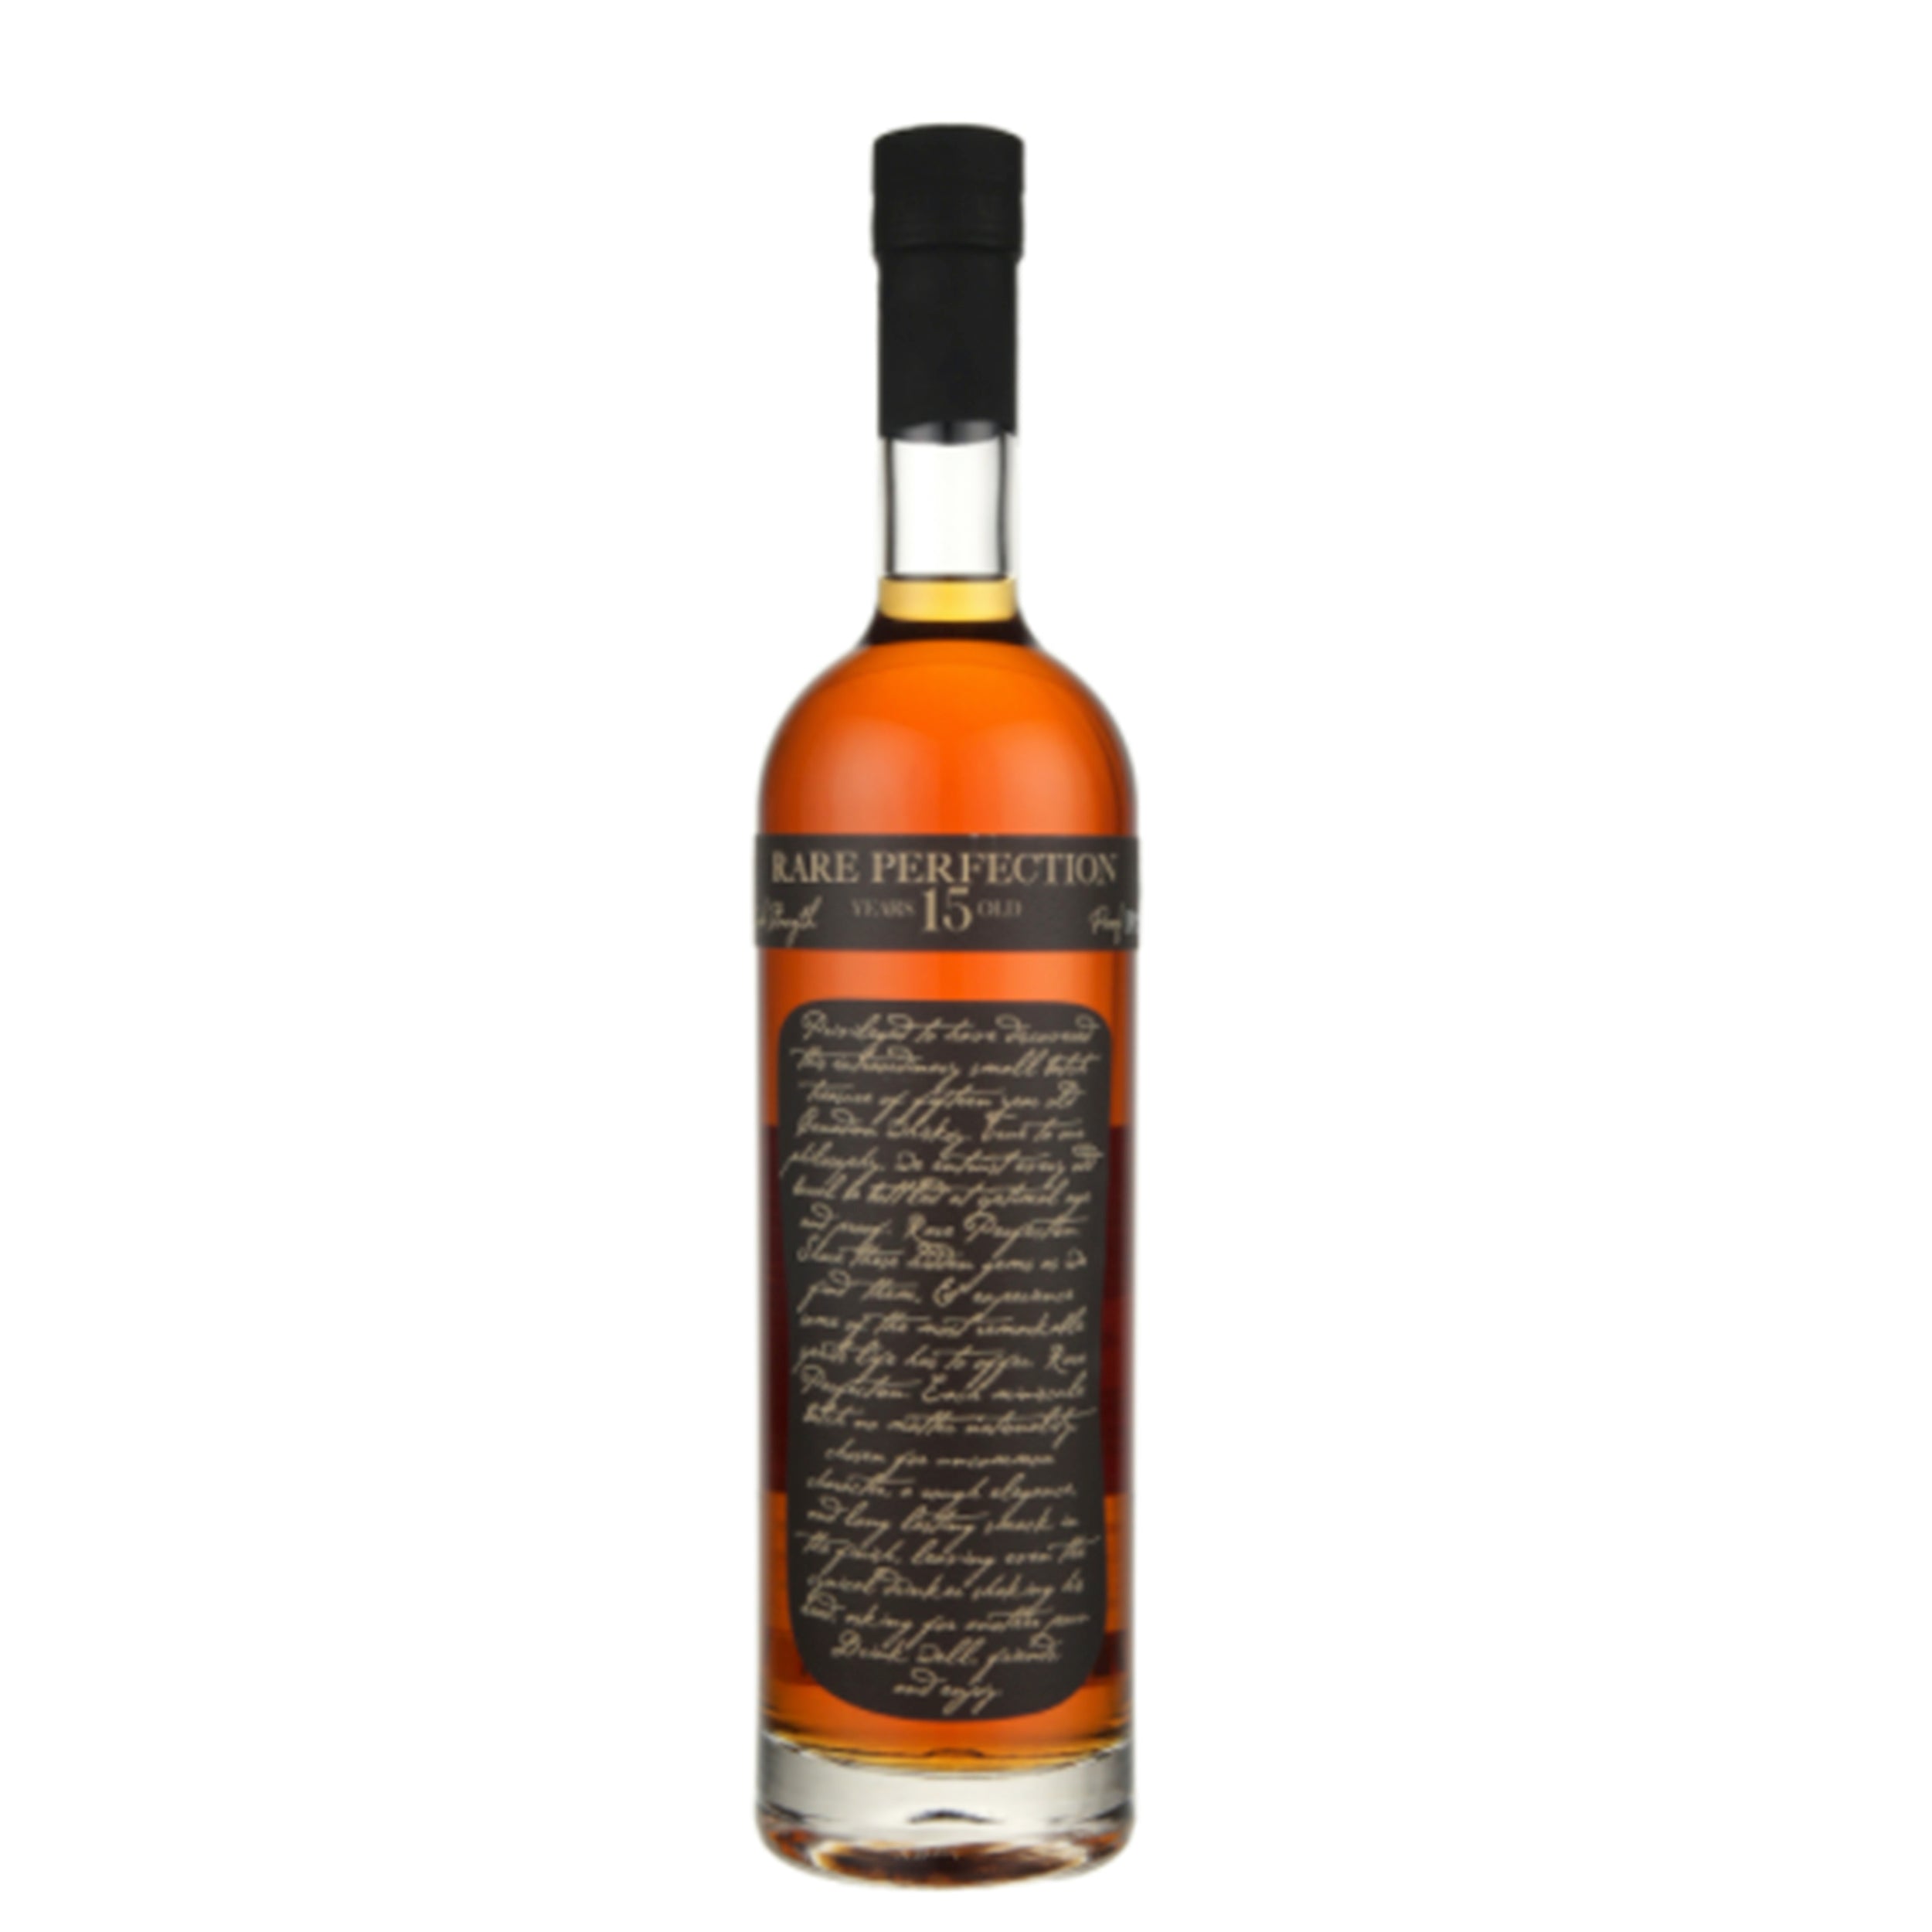 Rare Perfection Cask Strength 15 Year